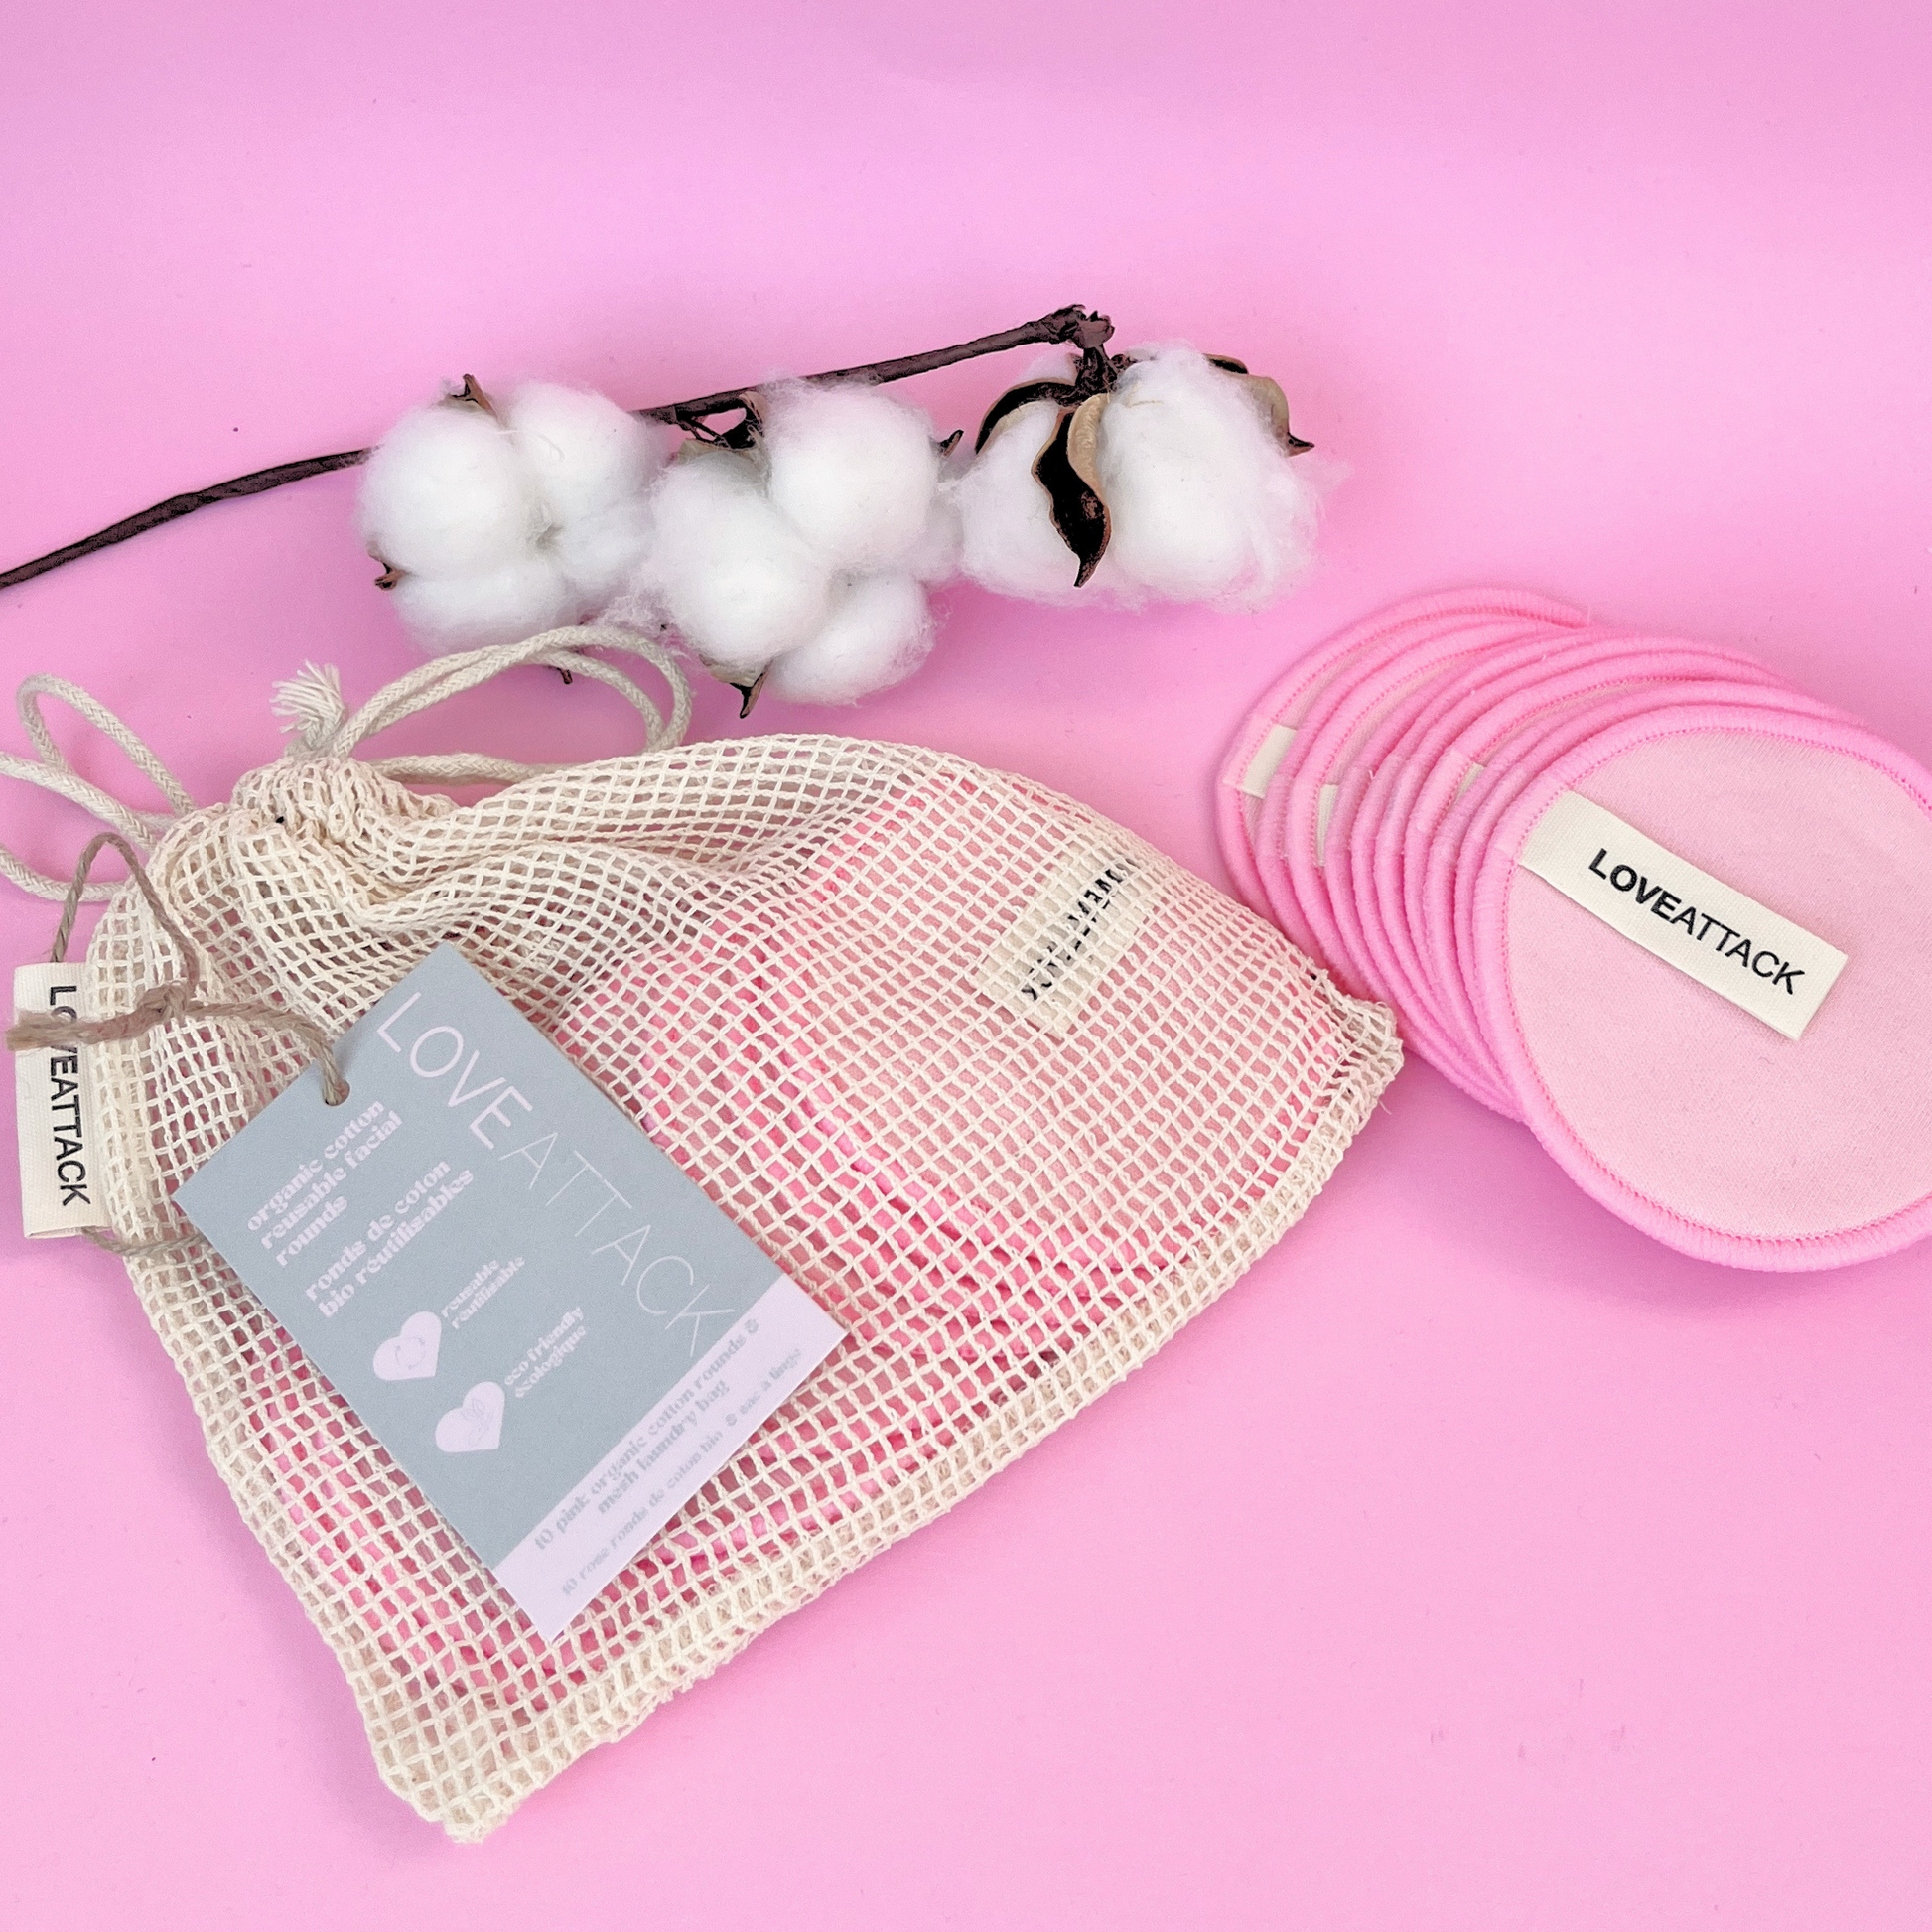 Reusable Cotton Rounds: Pros and Cons – Doe Beauty